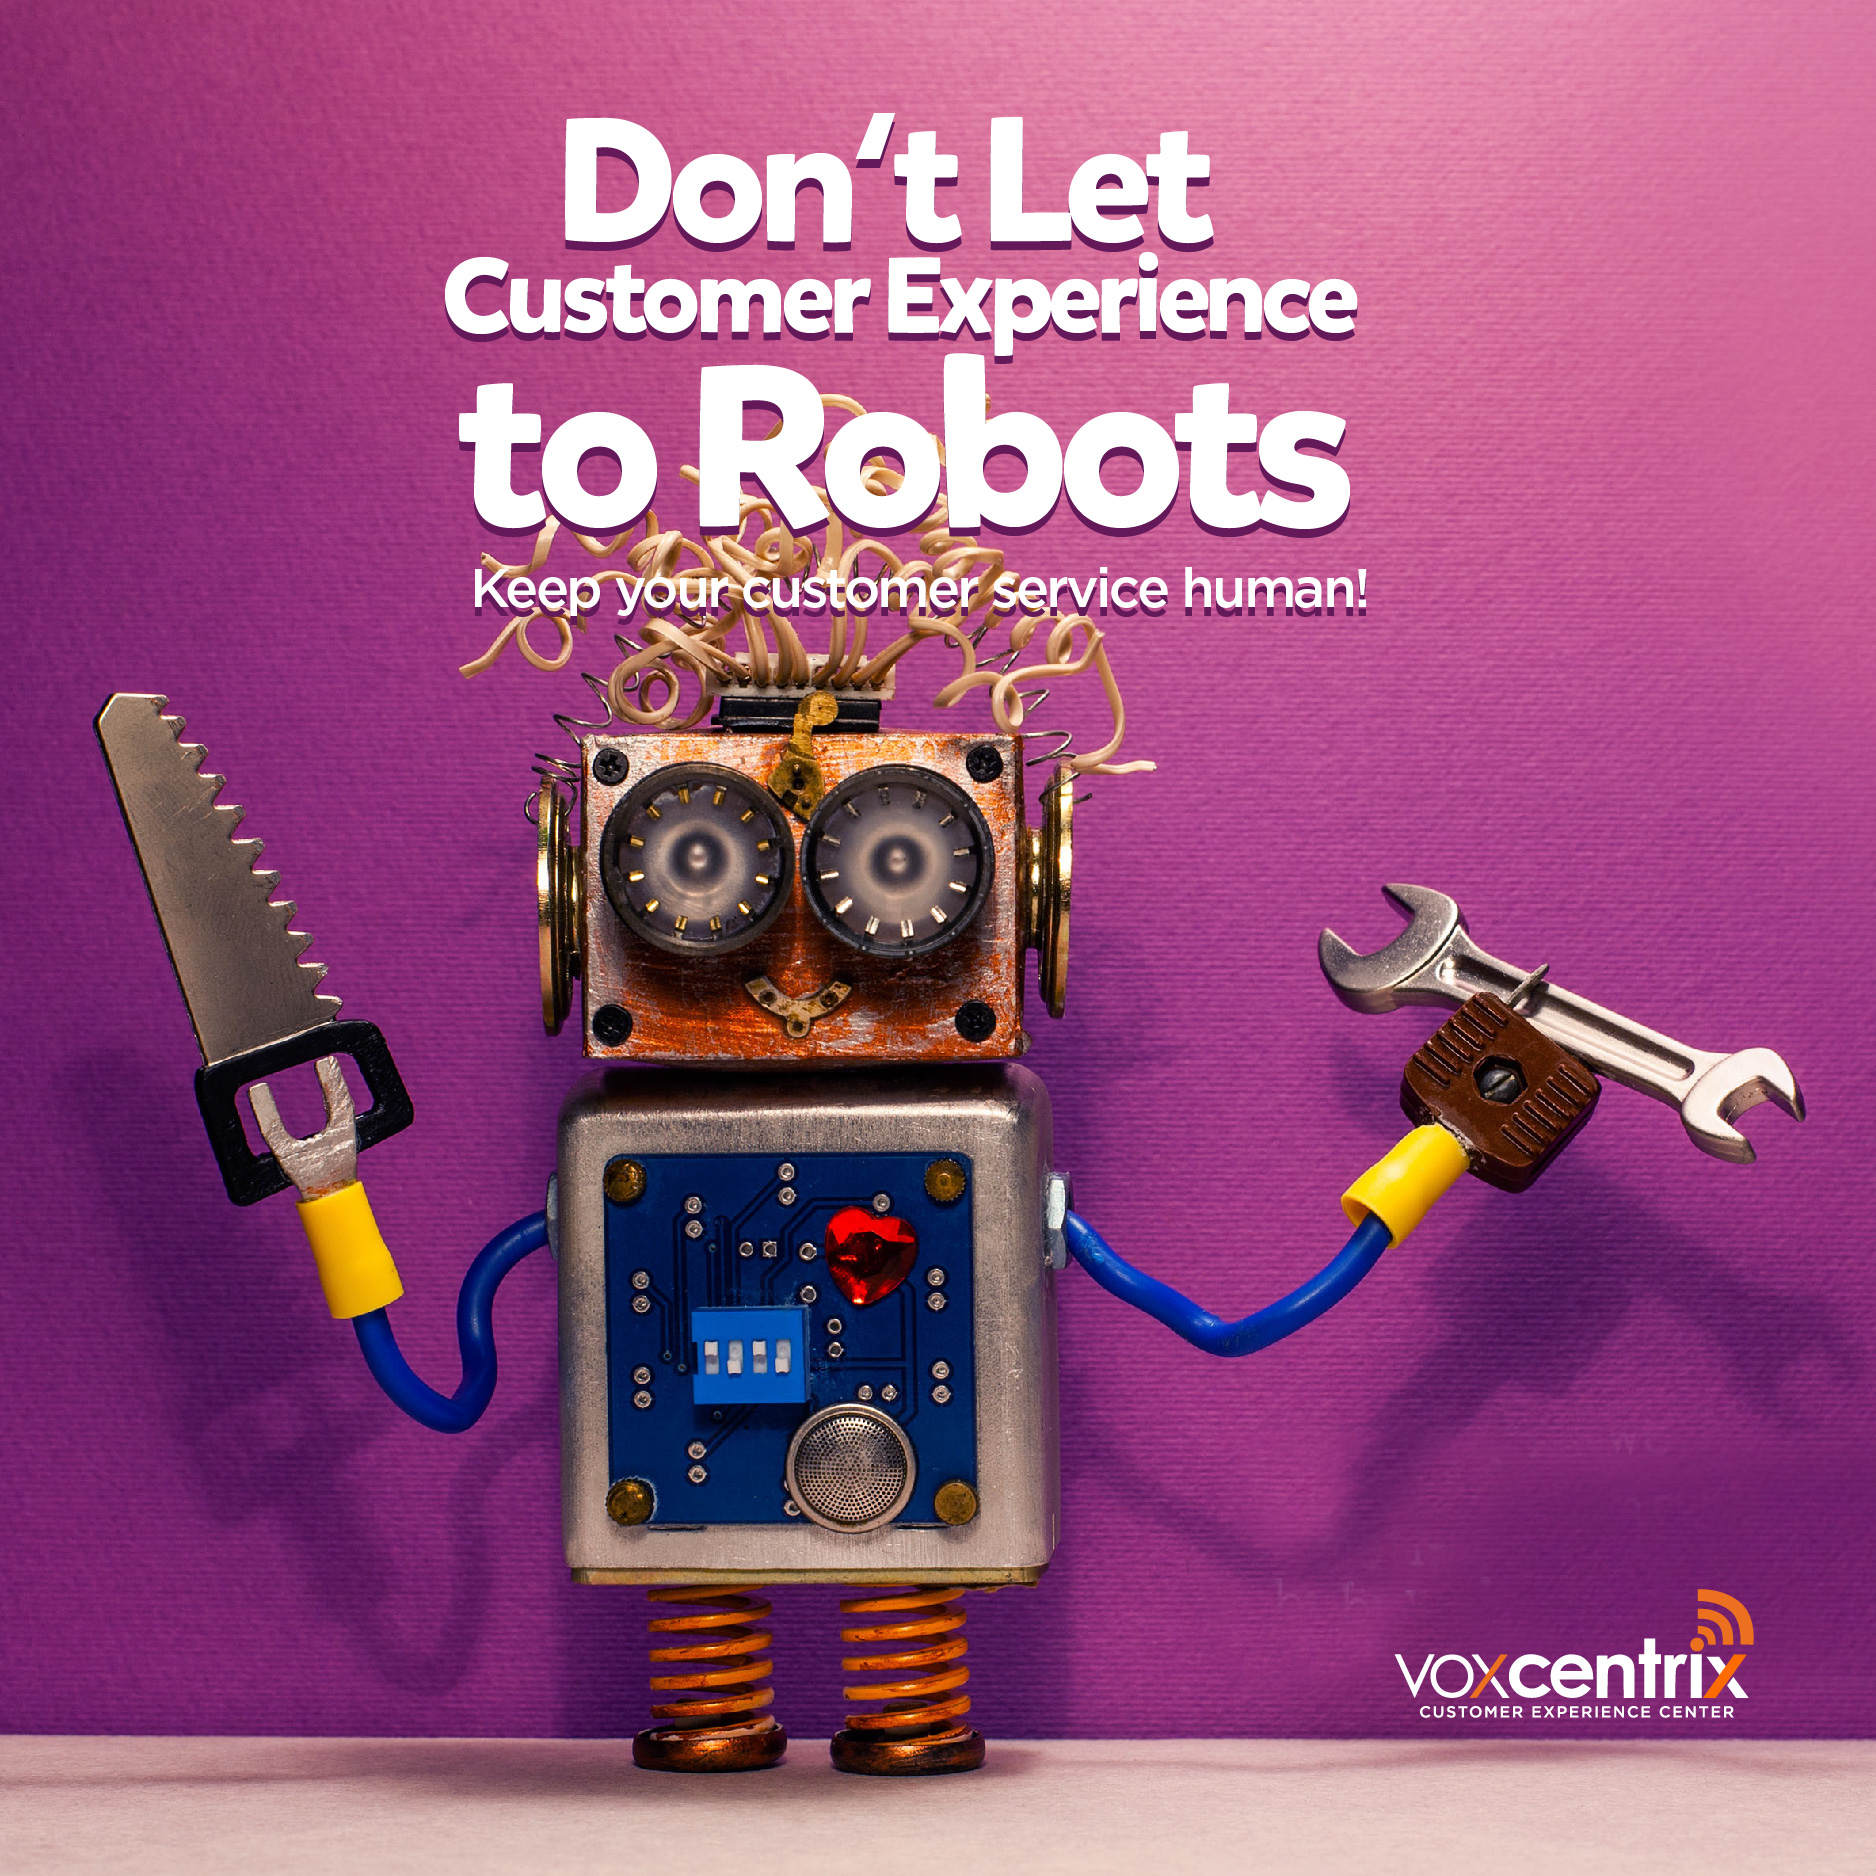 Don’t let customer experience to robots, keep your customer service human